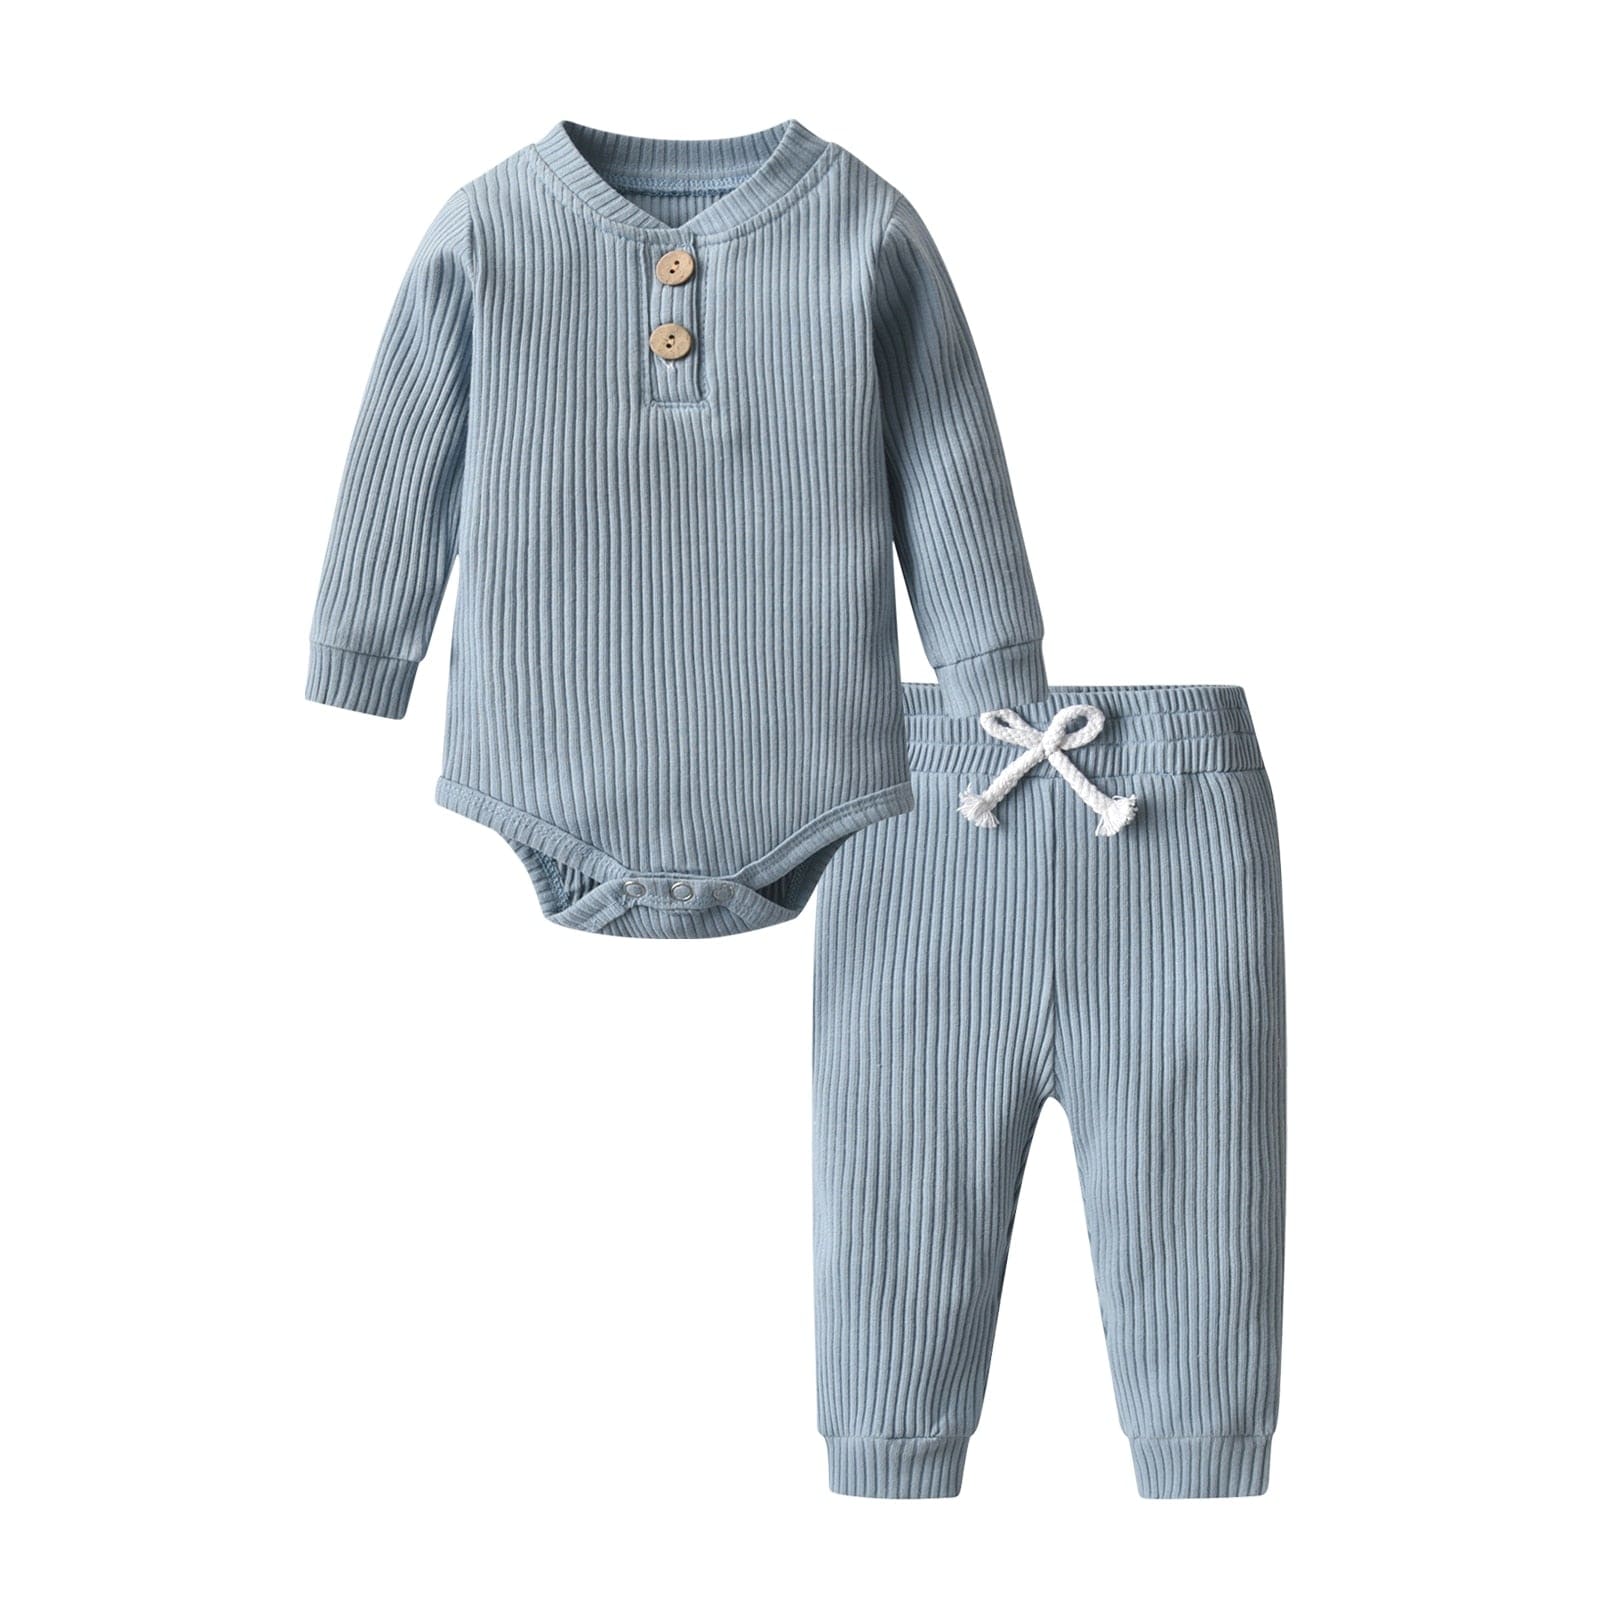 Cotton Ribbed Bodysuit and Pants Set for Babies: Comfortable and Stylish 